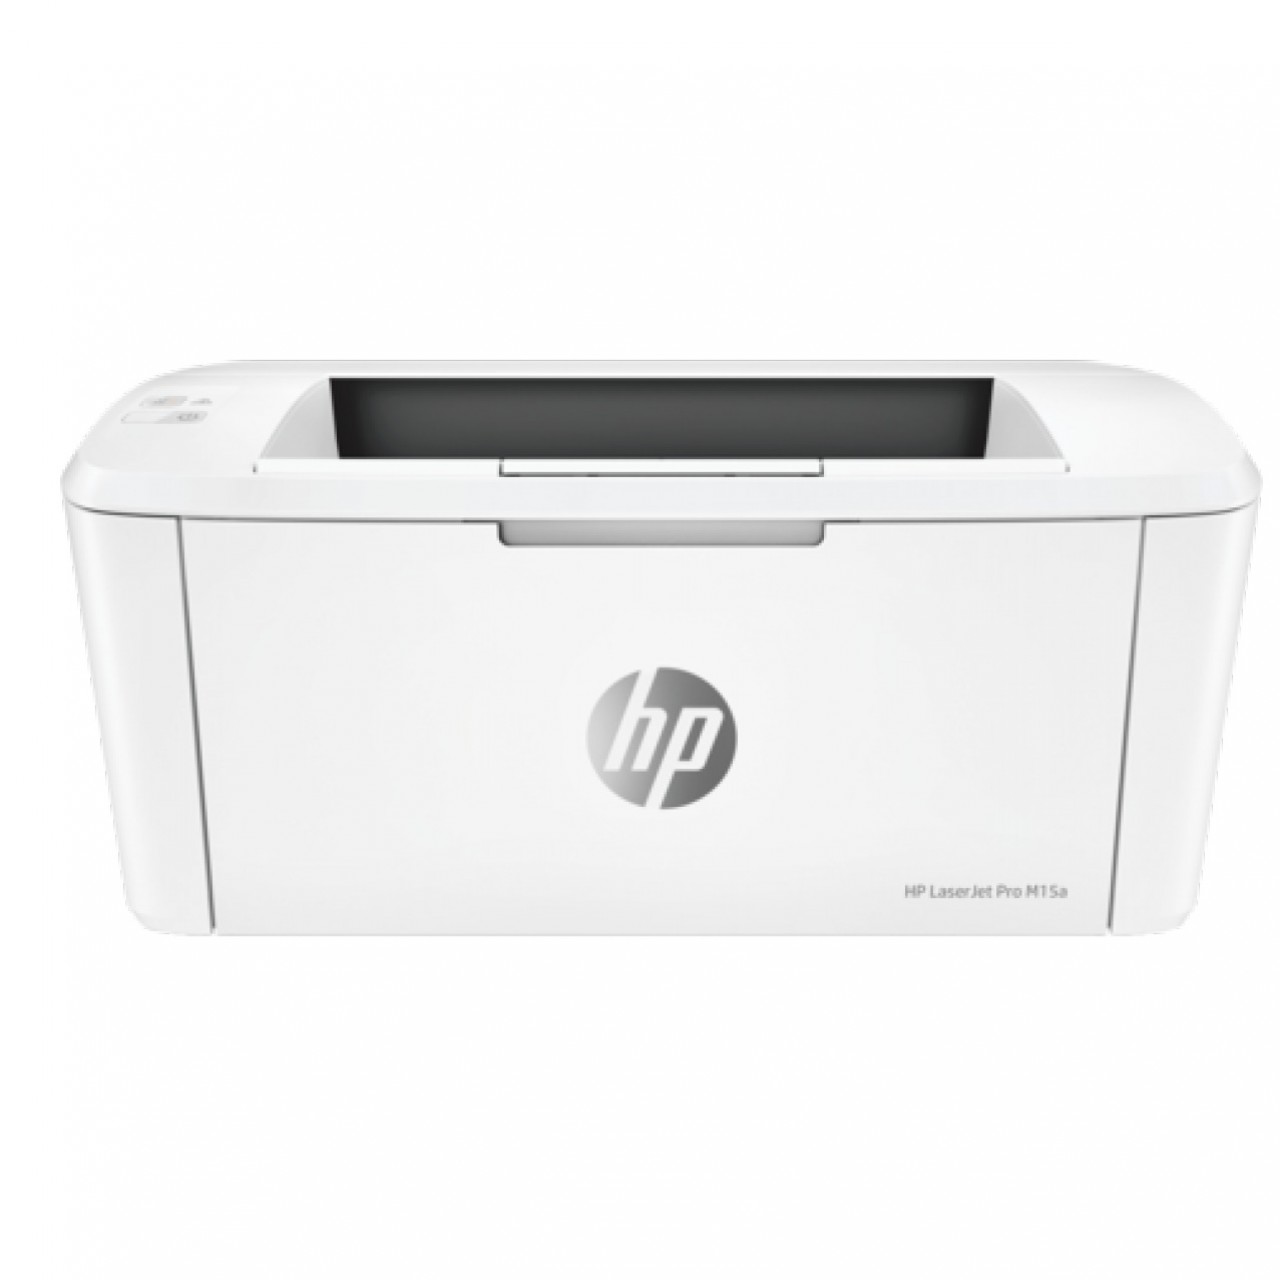 1. HP Printer Laser Jet Pro M15a (W2G50A) – 18 to19 pages per minute -150-sheet input tray